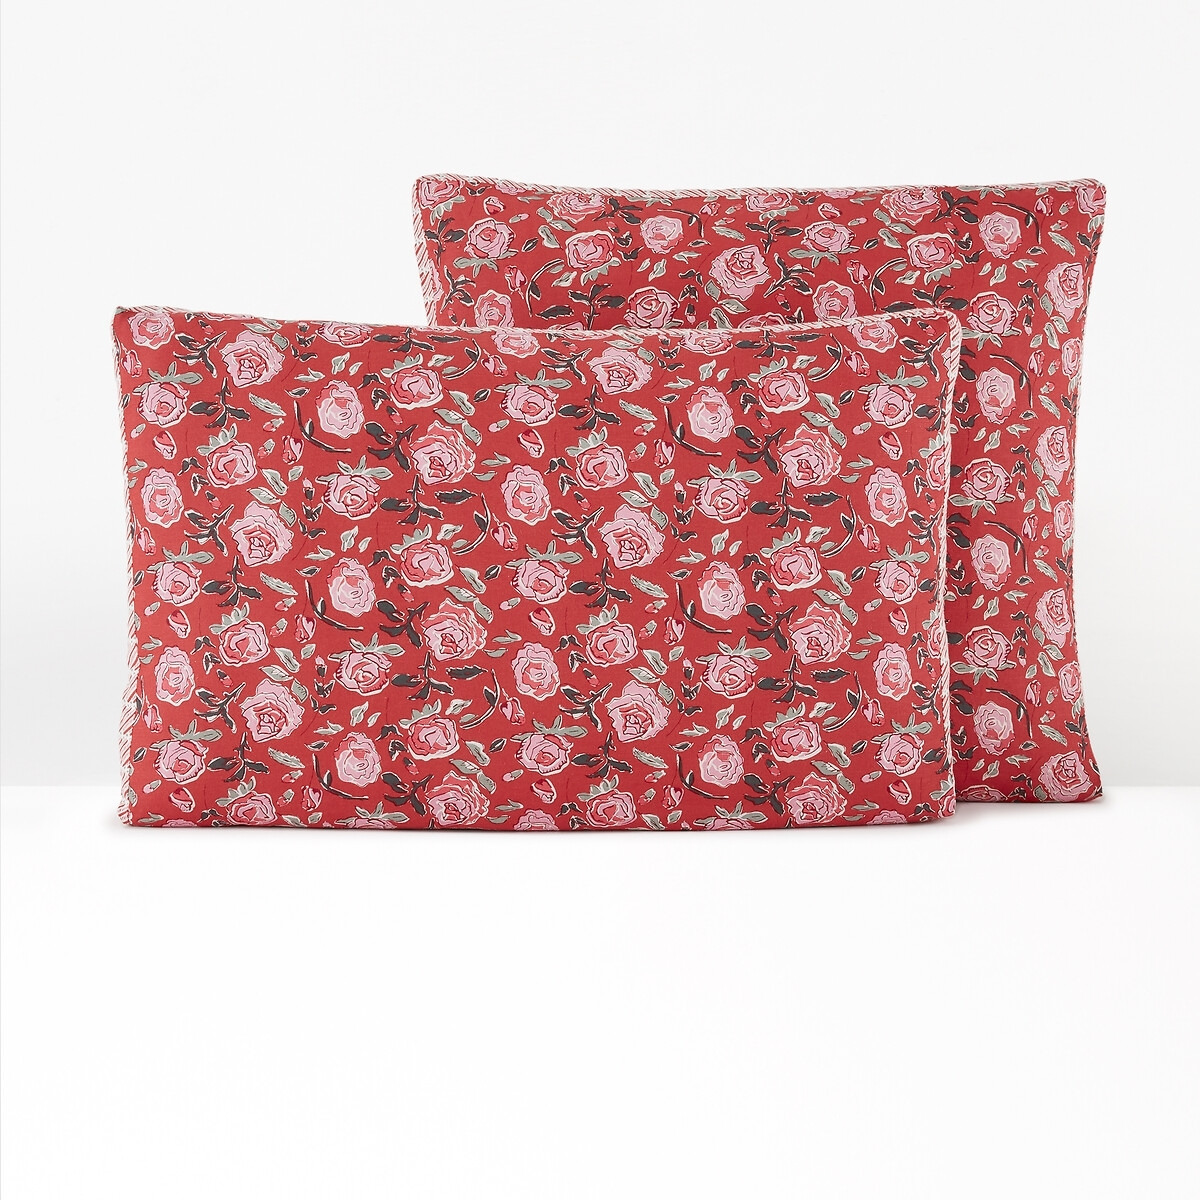 Paolisi Floral Washed Cotton/Linen Pillowcase - image 1